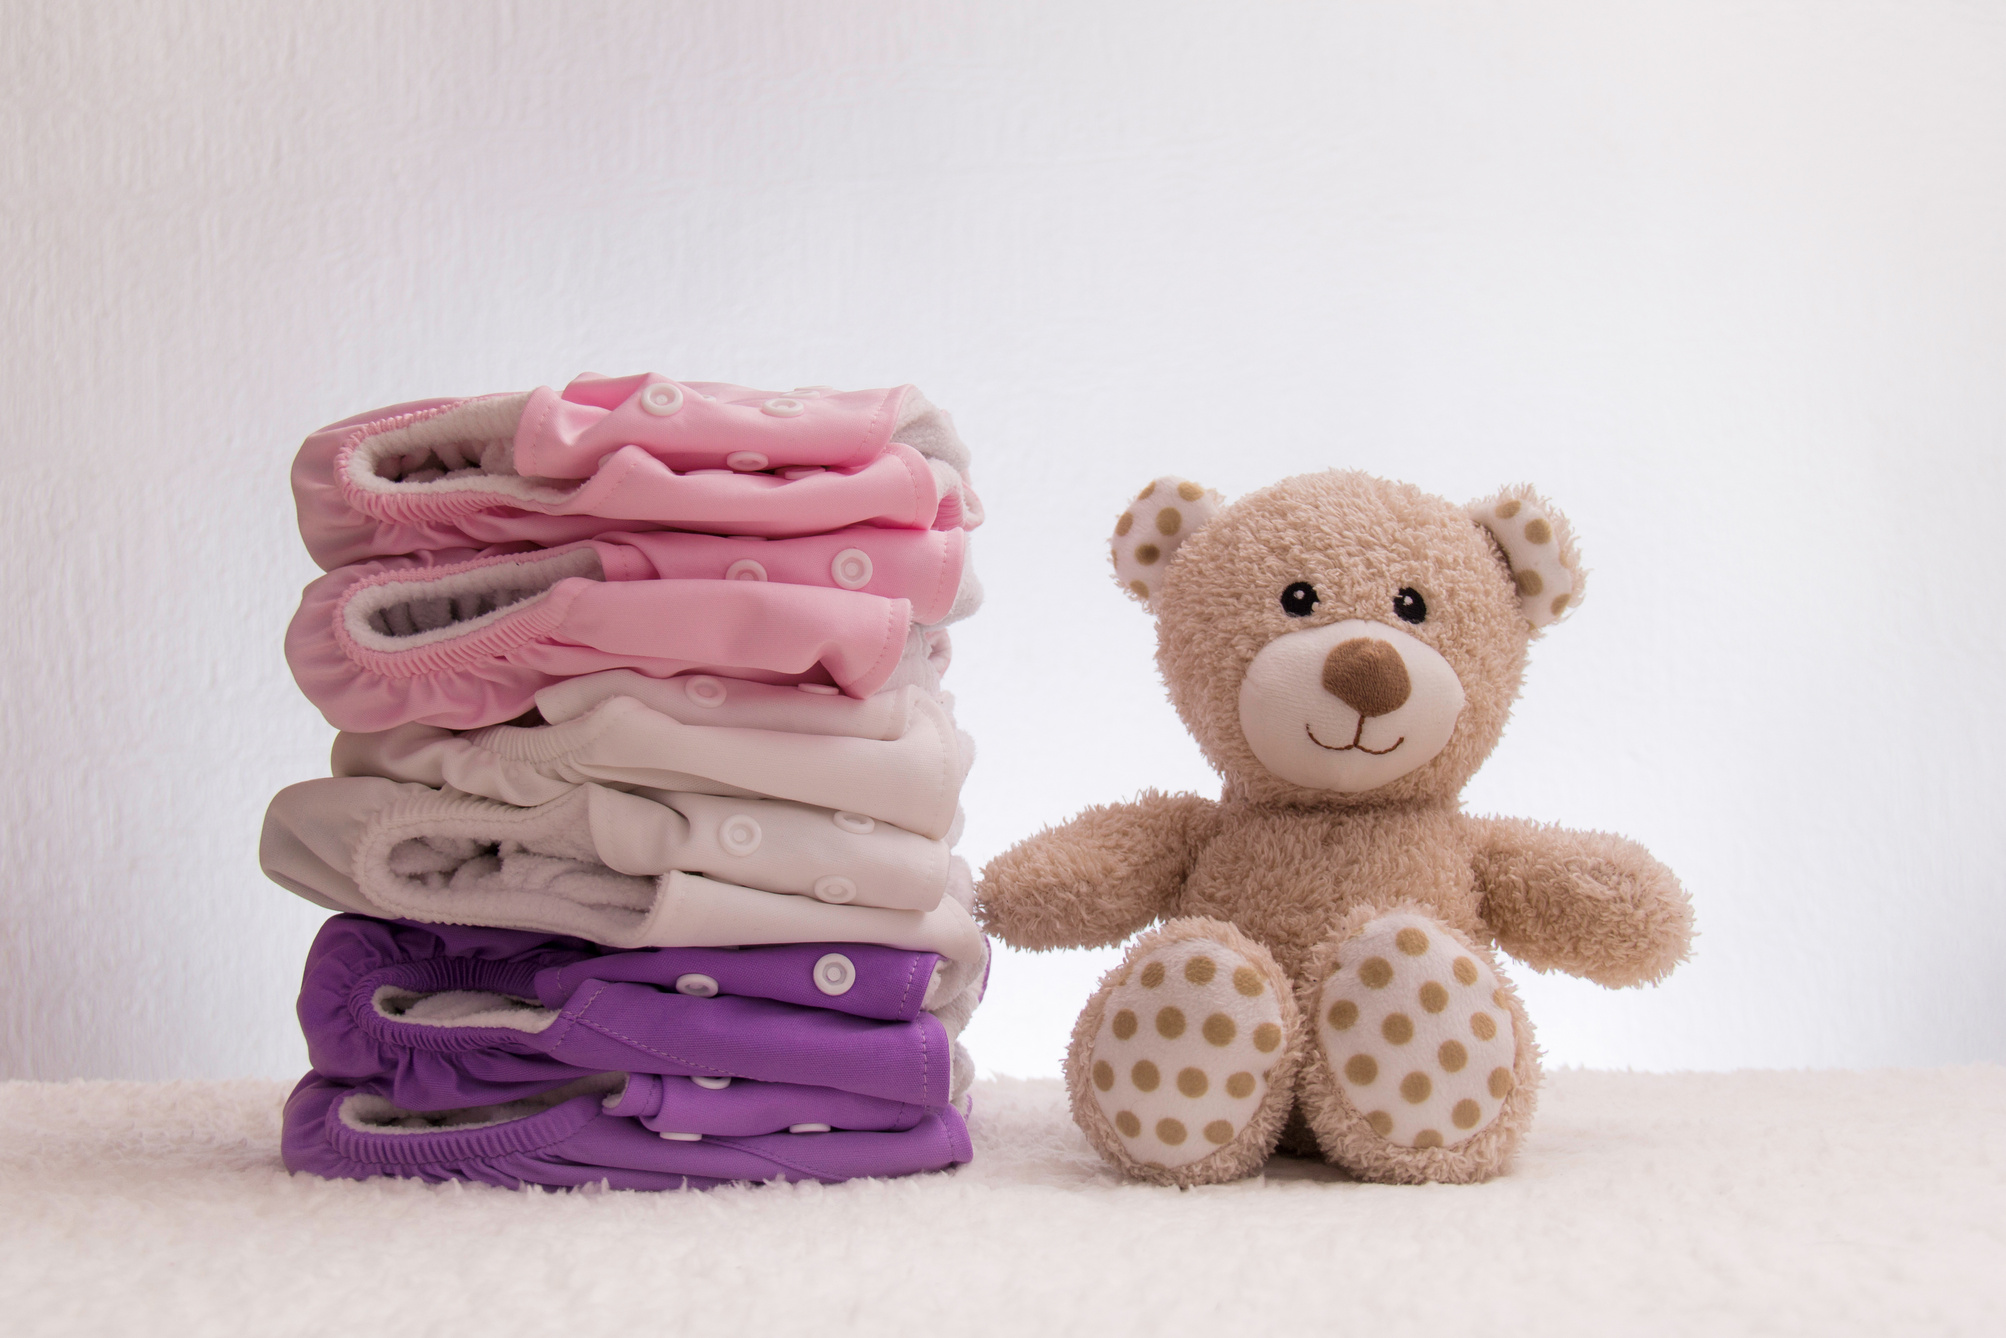 Cloth diapers stacked with a teddy bear